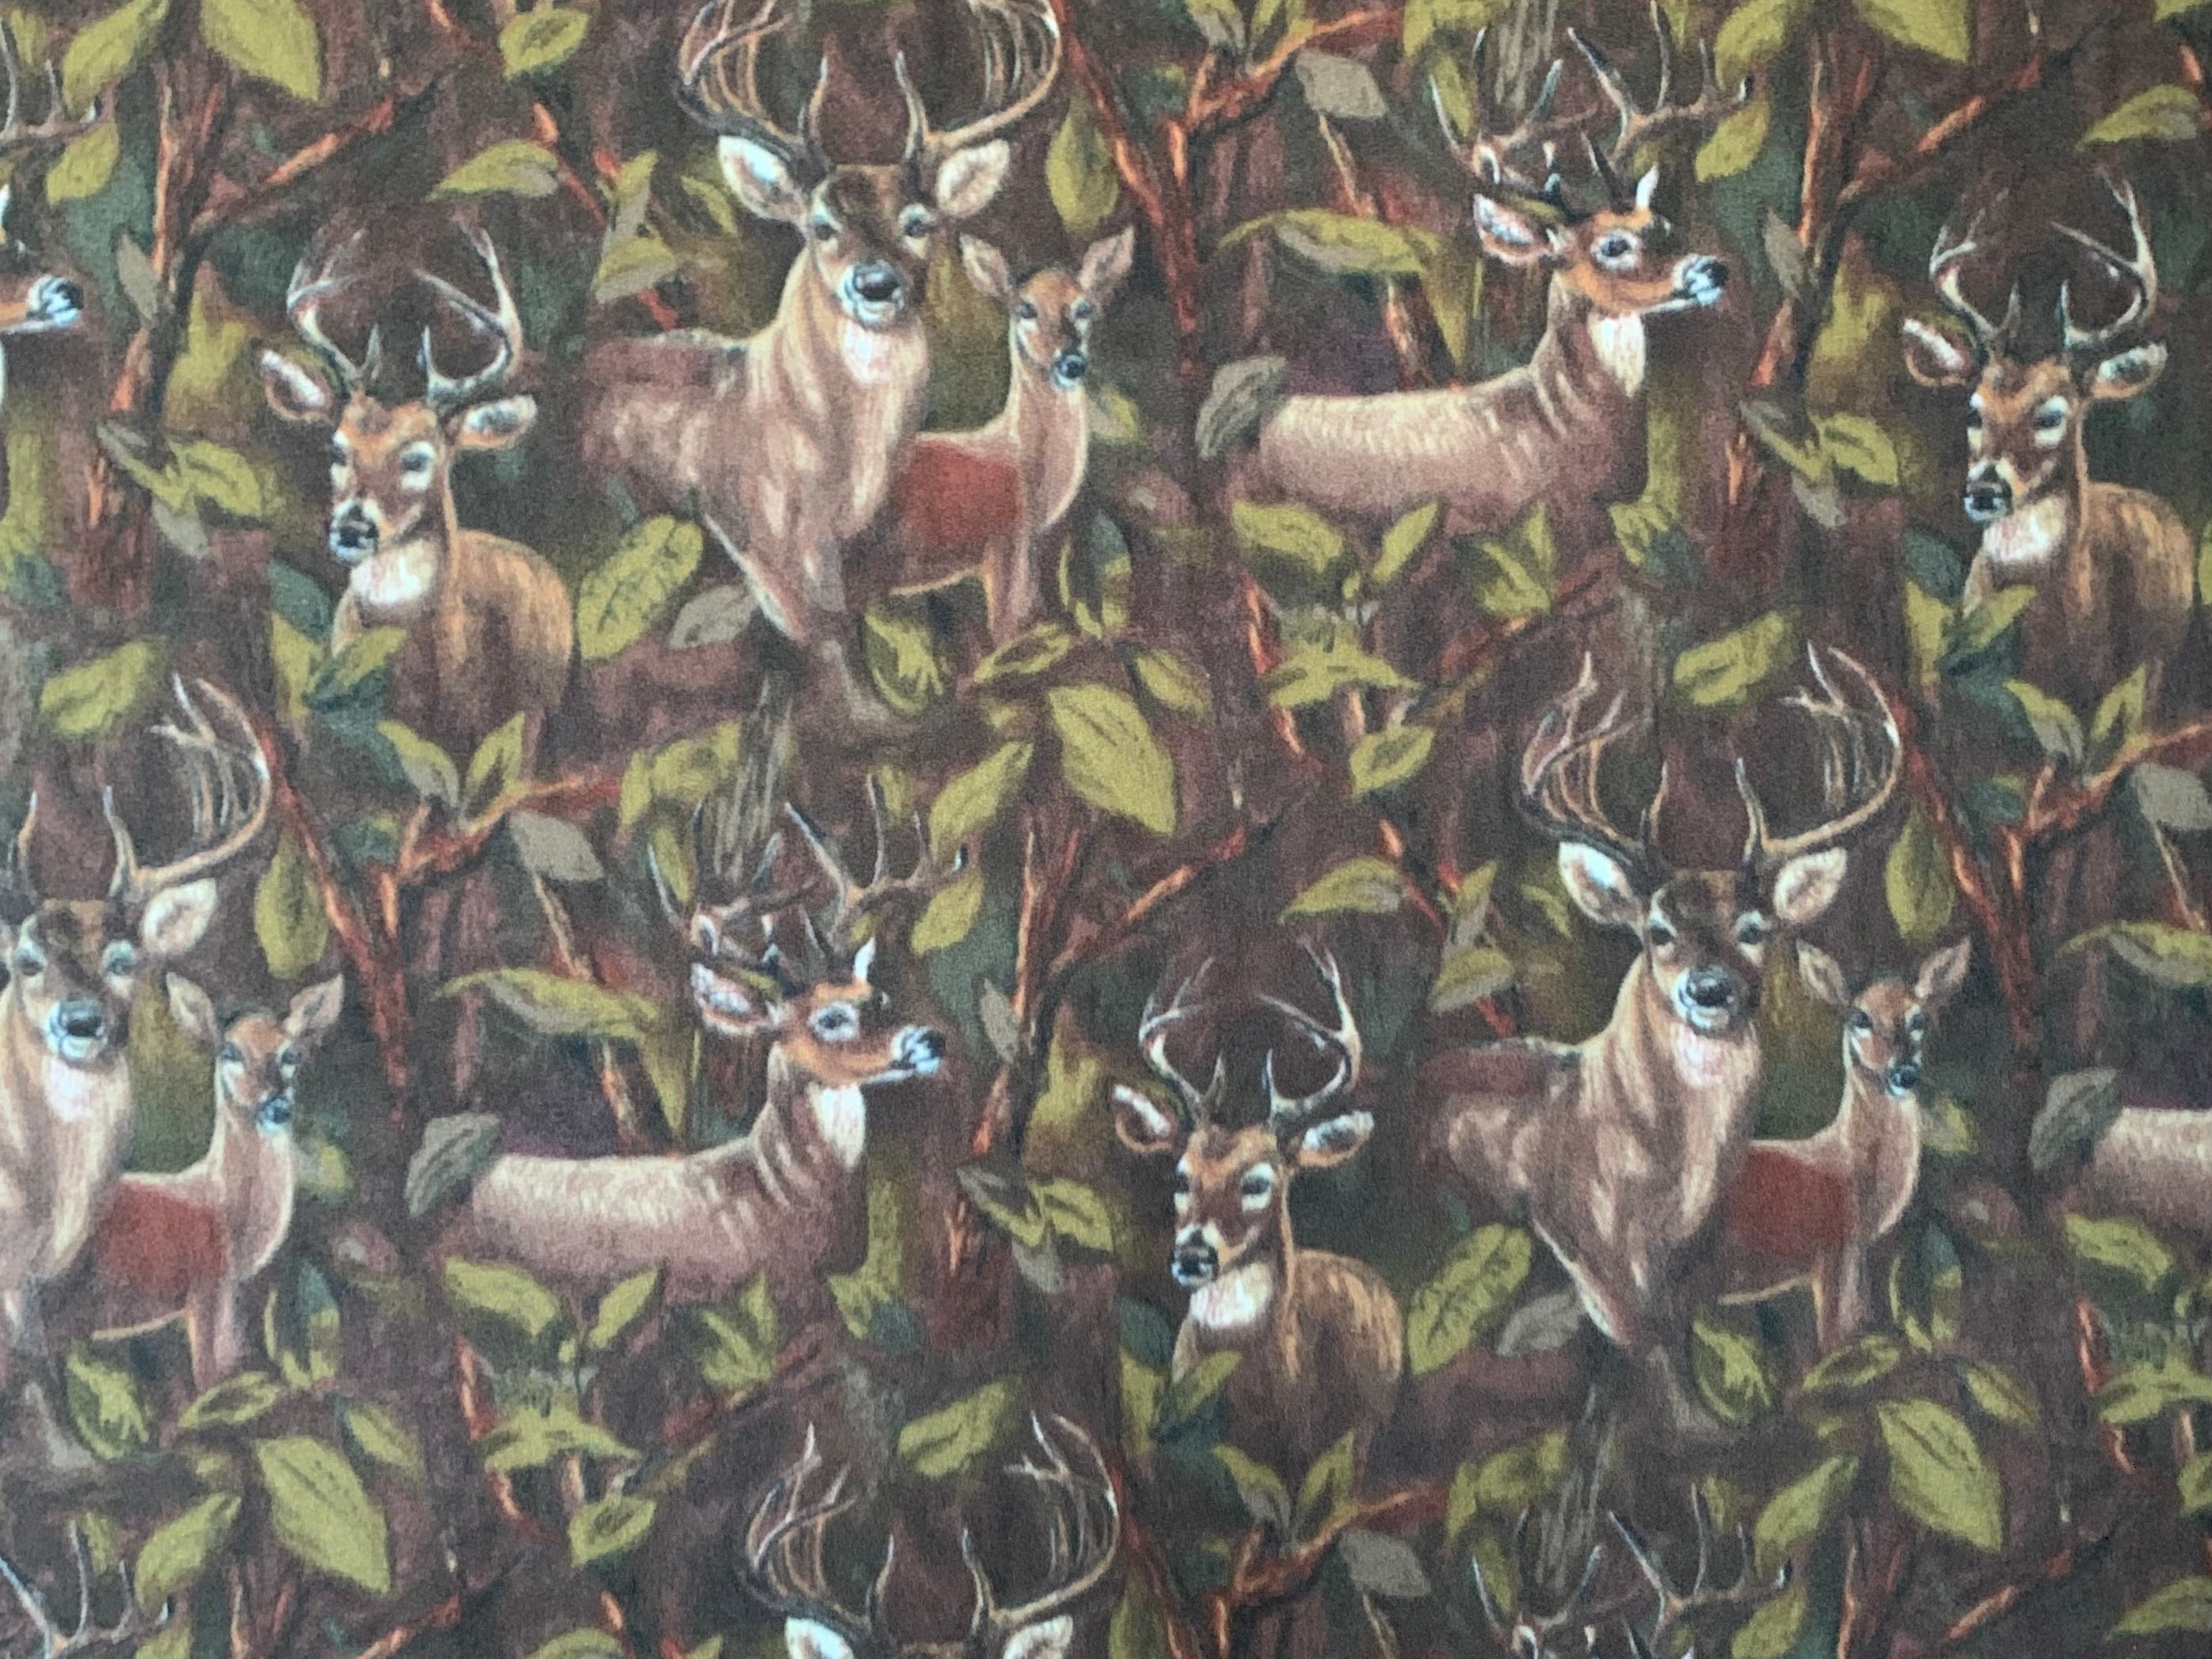 No Sew Blanket Kit - Camo Deer - Personalization Available